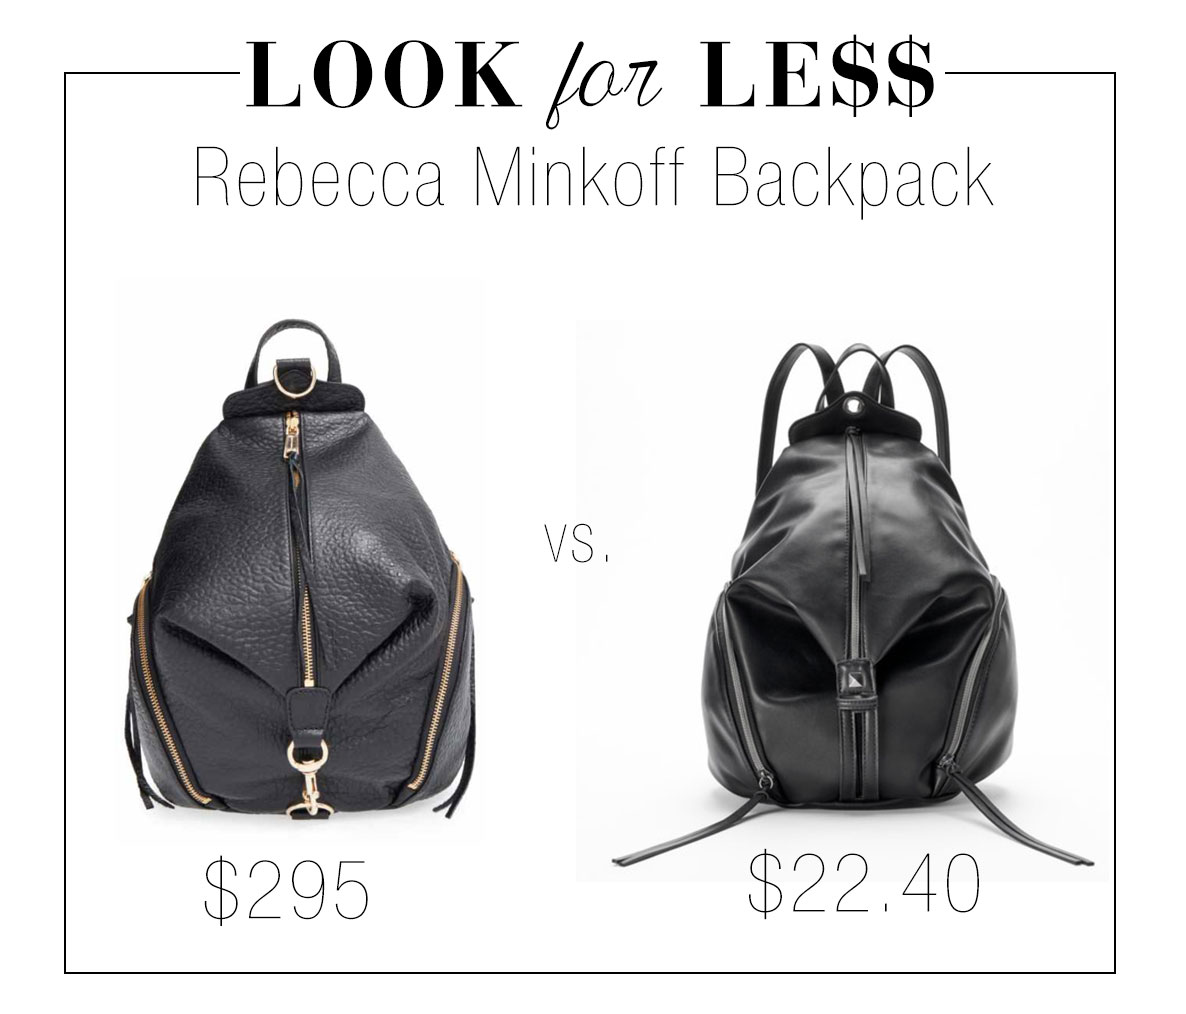 Get the look of Rebecca Minkoff's 'Julian' backpack for less.